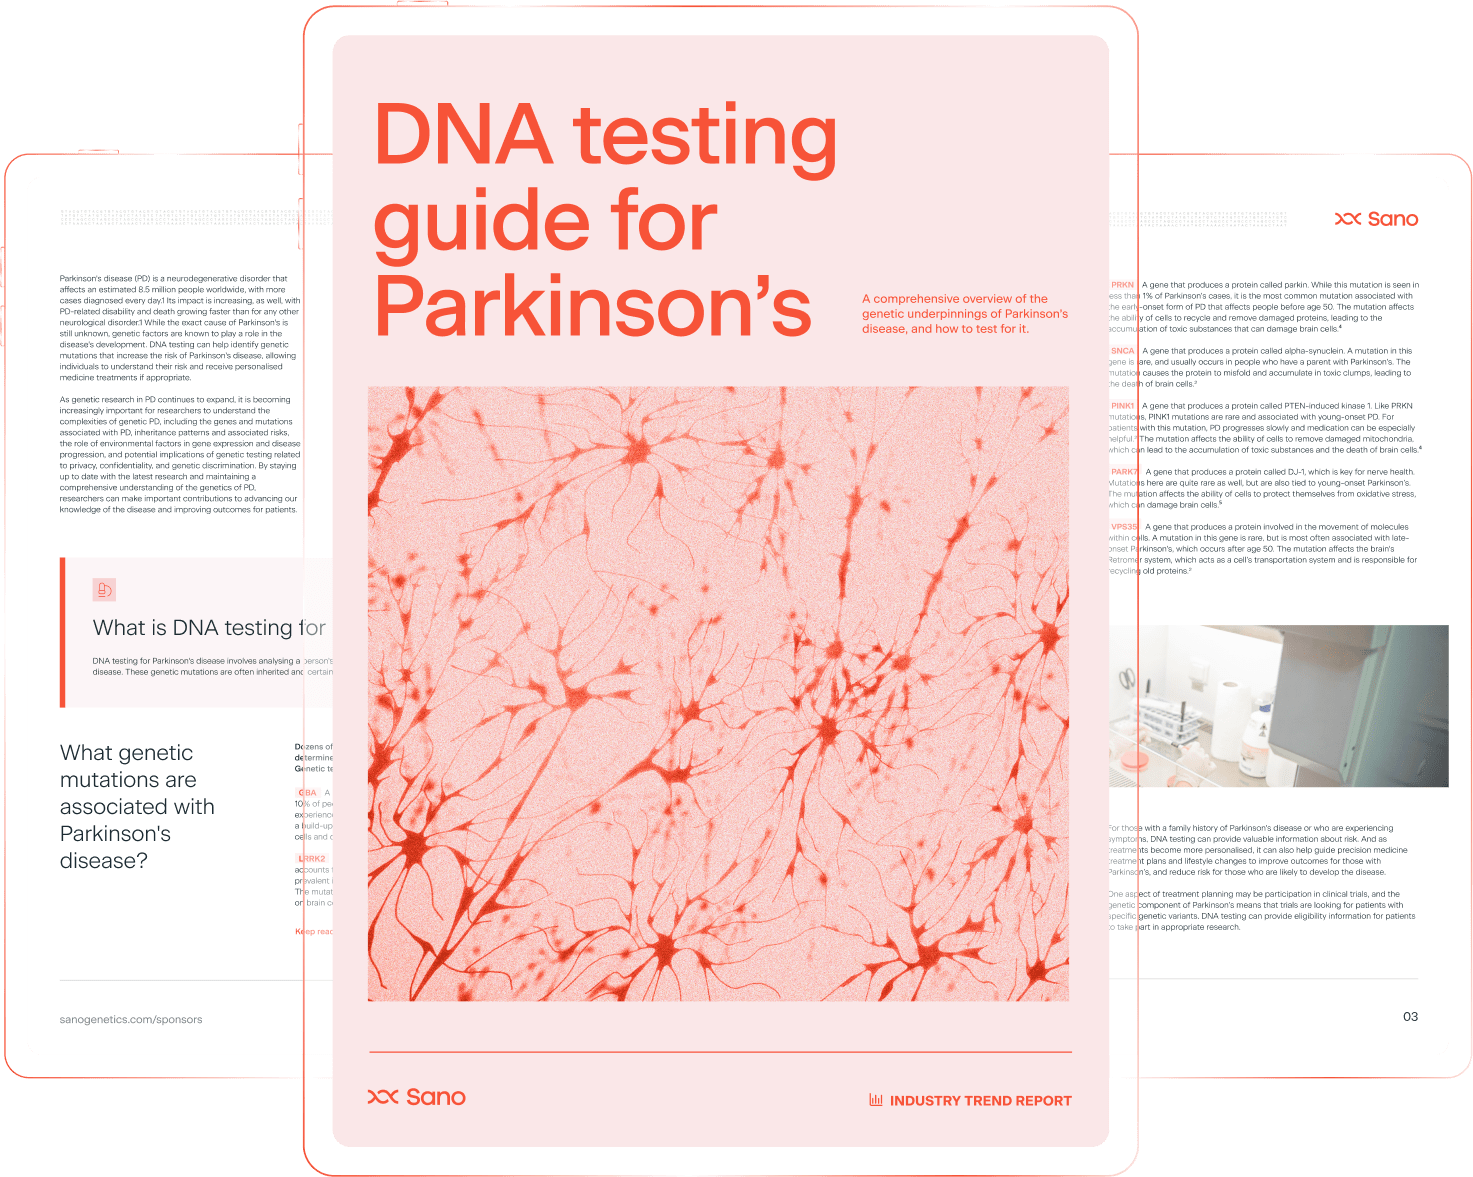 dna testing guide image